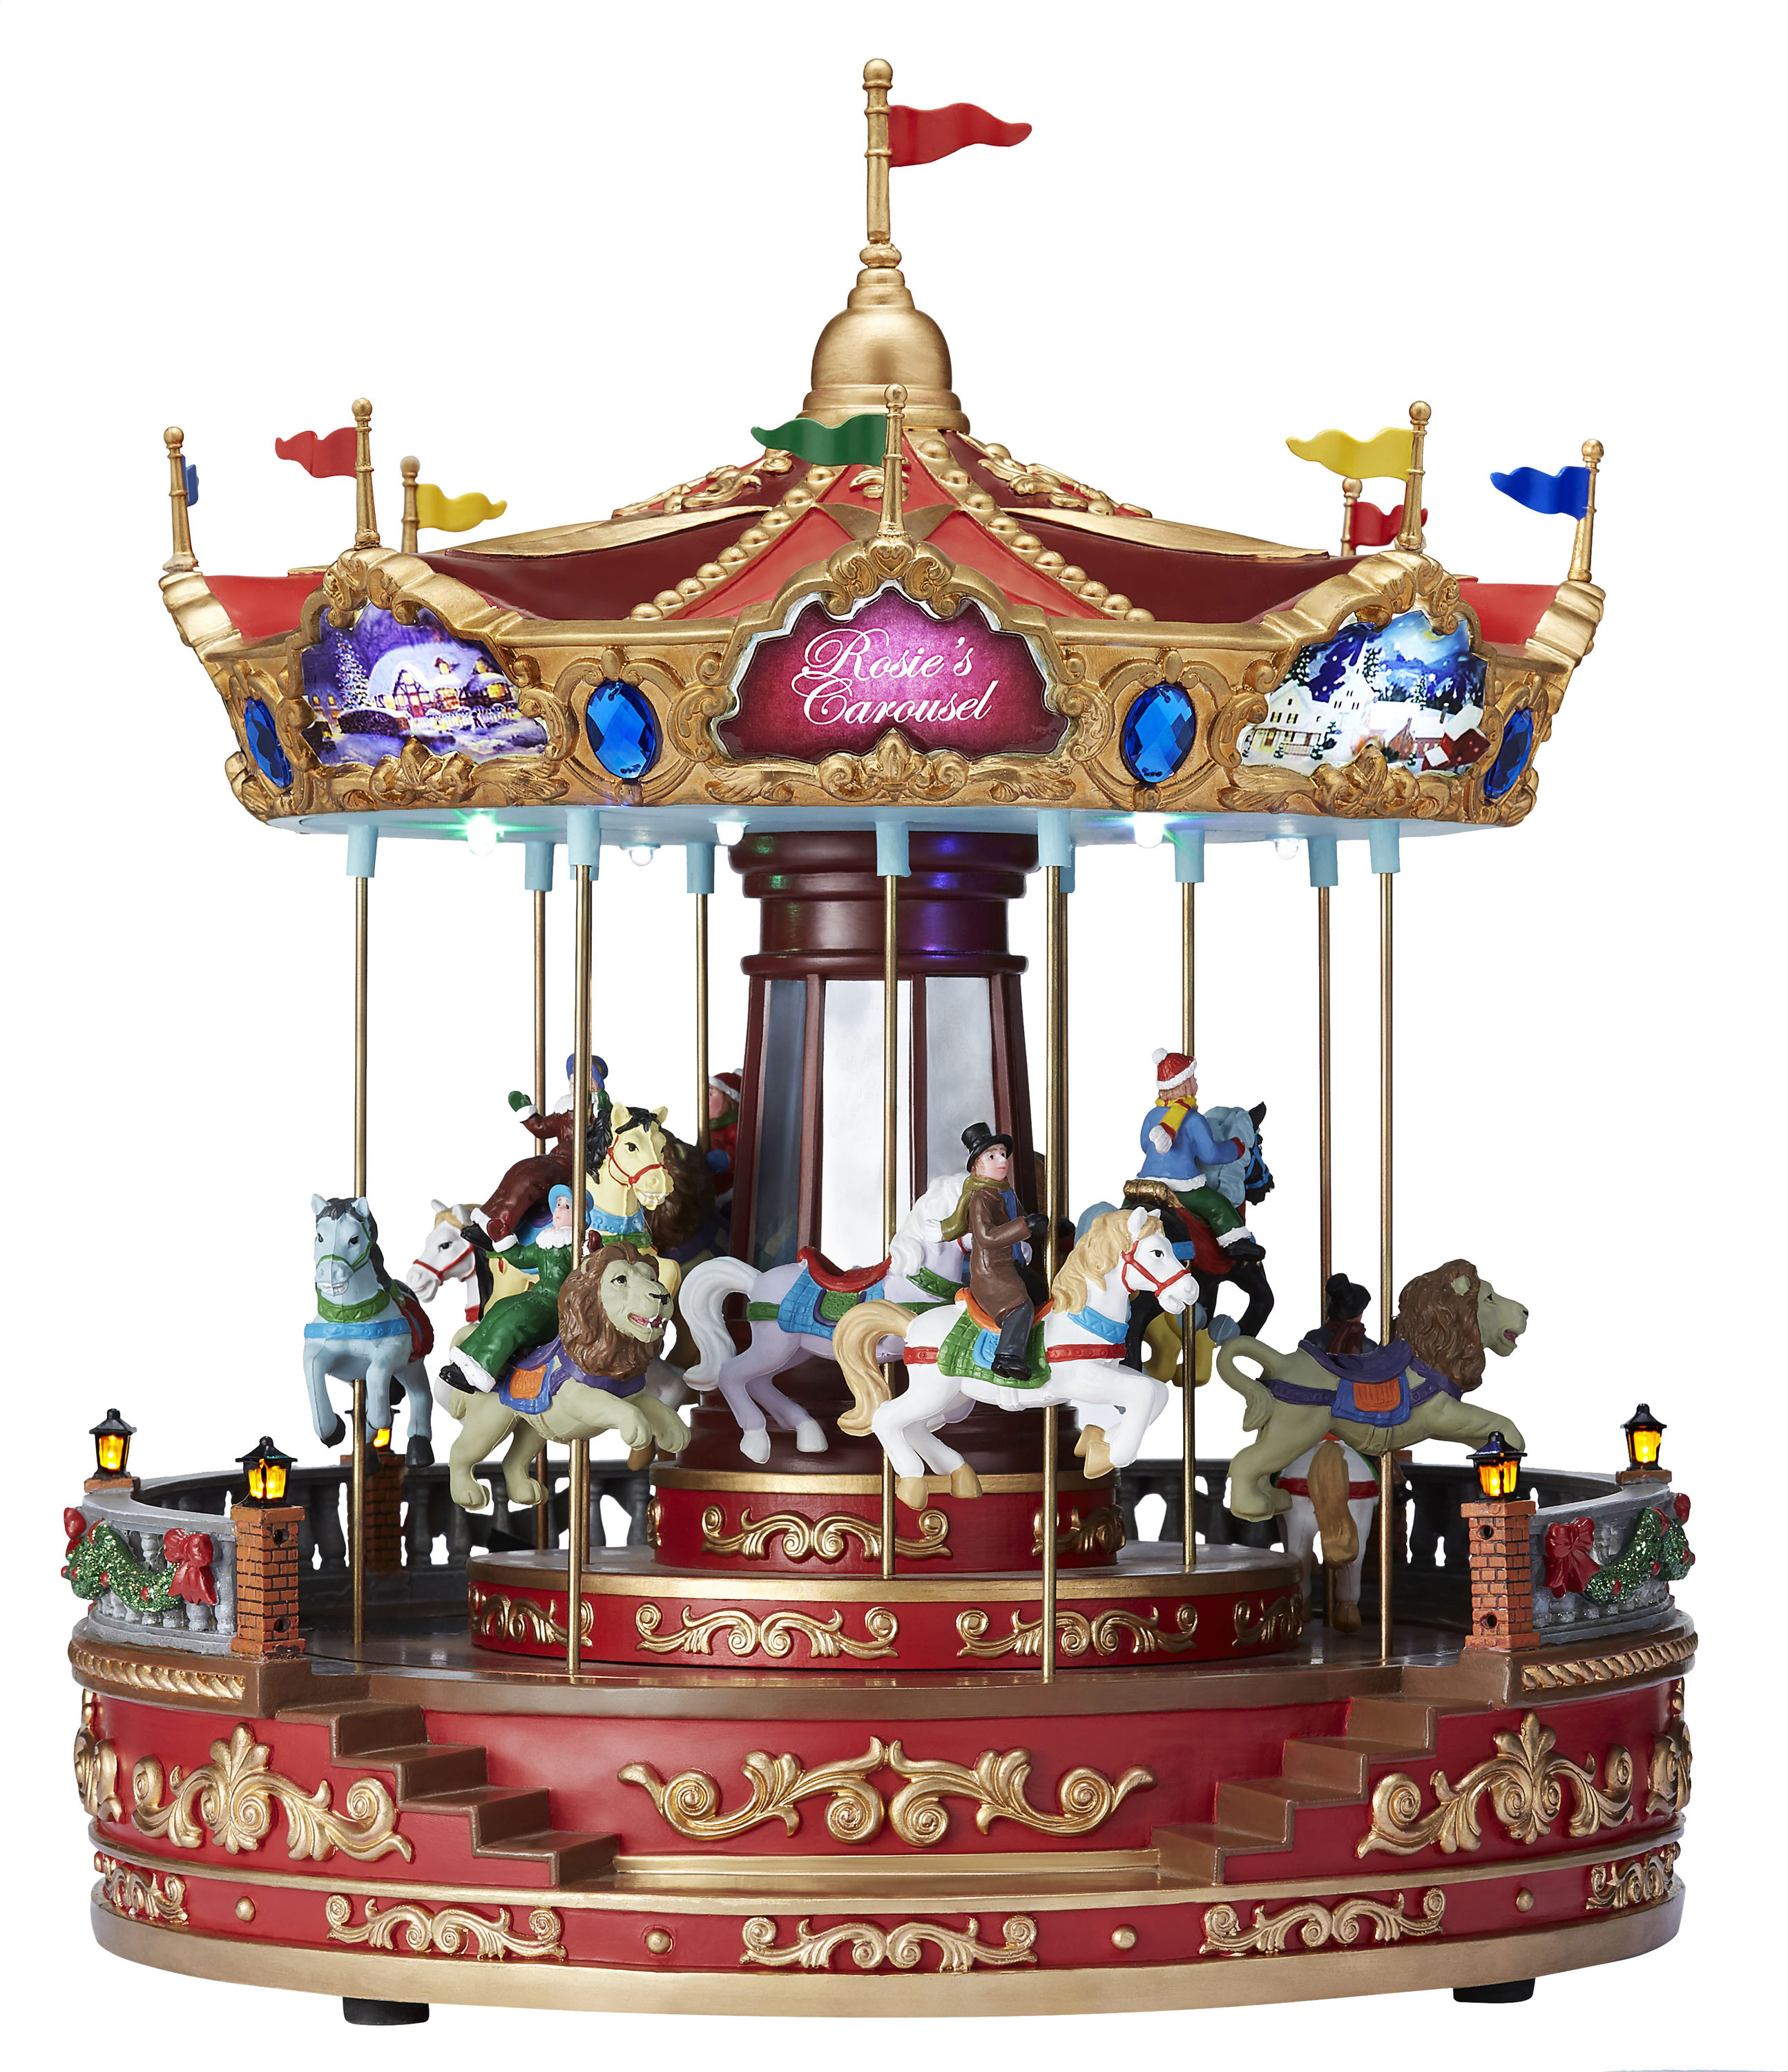 Carole Towne Ct Rosie’S Carousel Lighted Musical Village Scene at Lowes.com